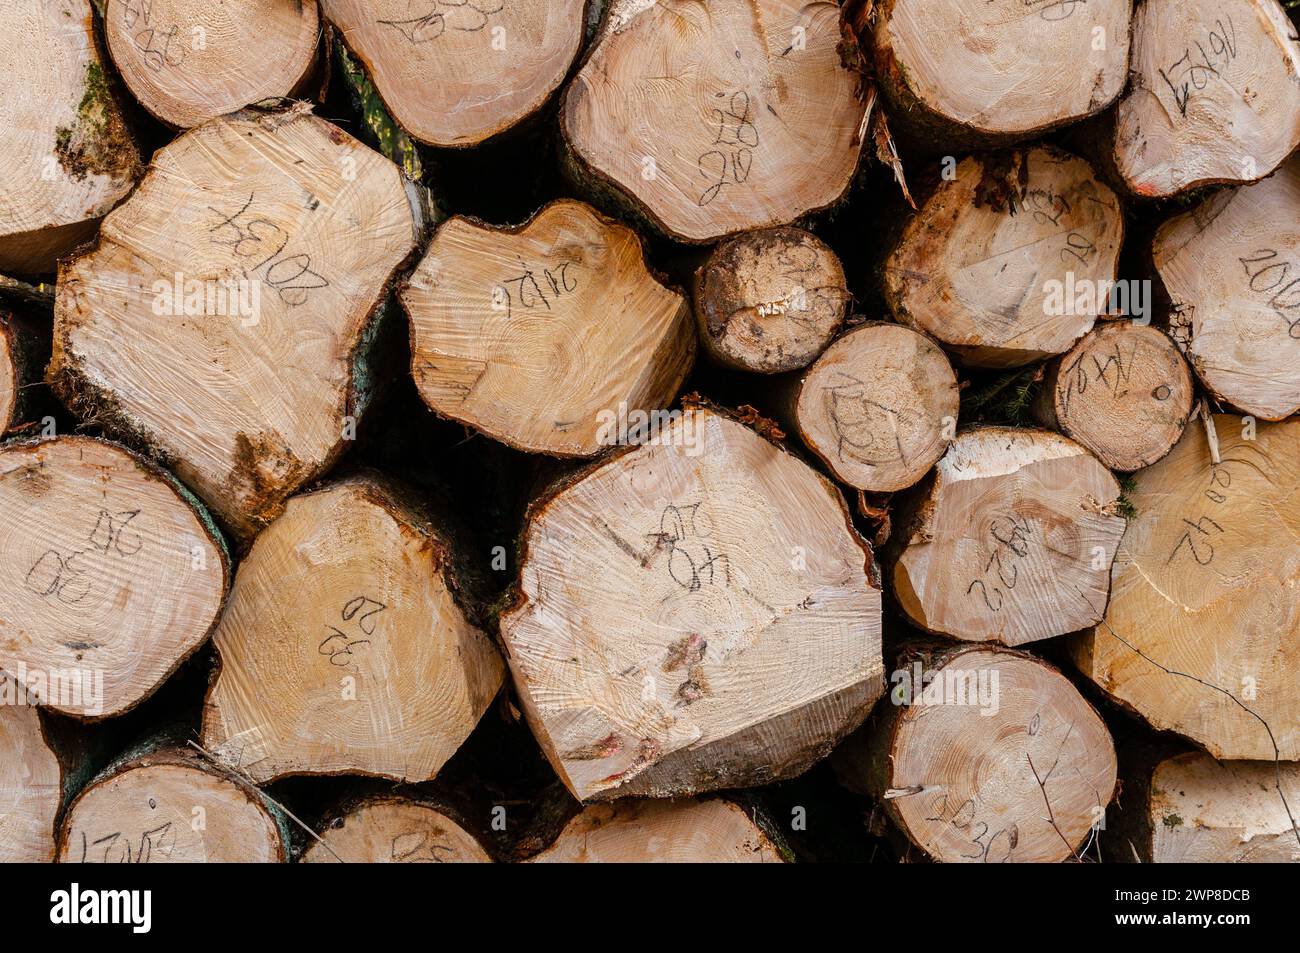 The Sawed tree trunks in a stack in Germany Stock Photo